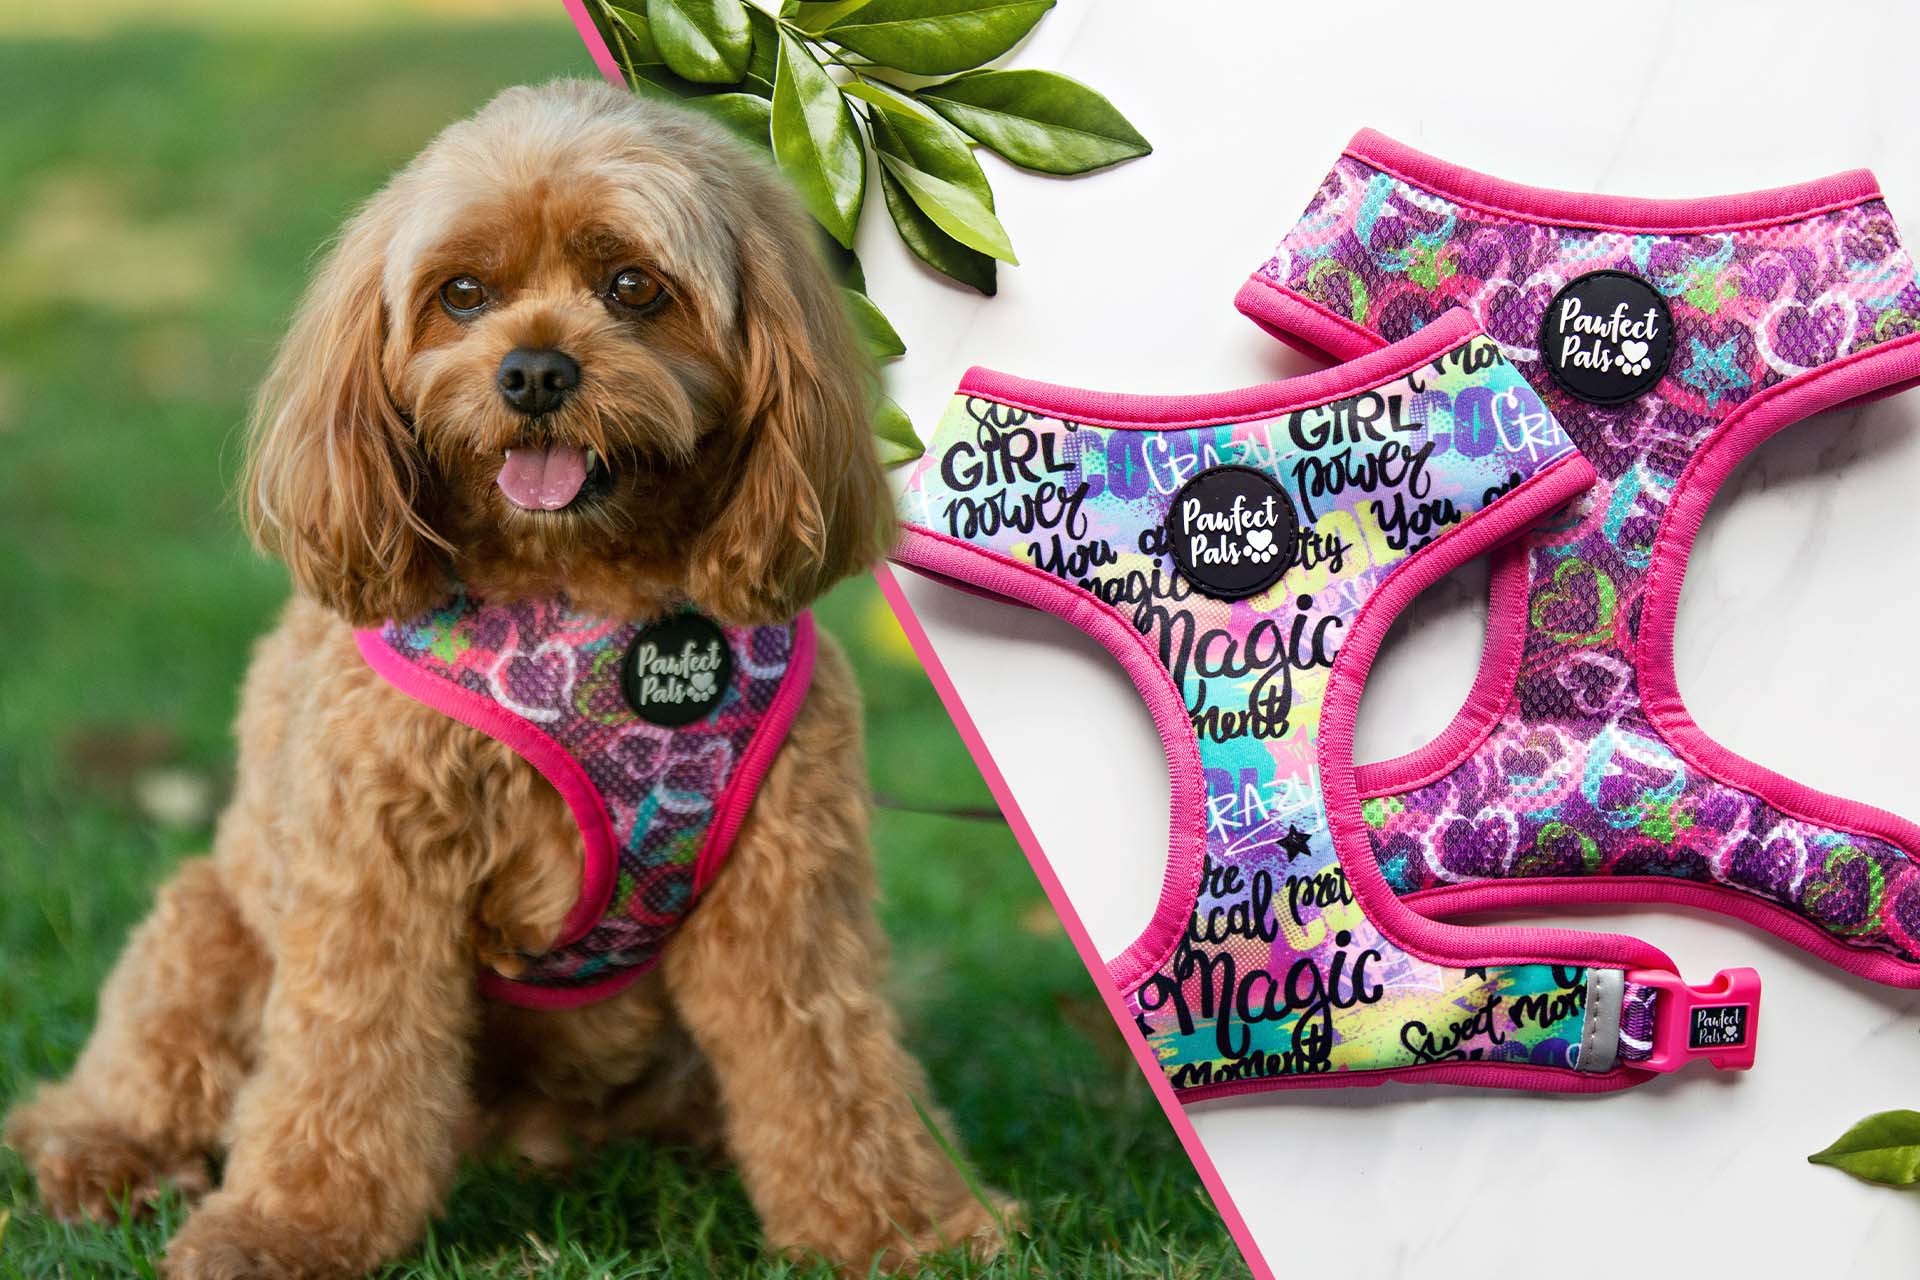 Classy, Sassy and a Little Bad-Assy dog accessories collection.